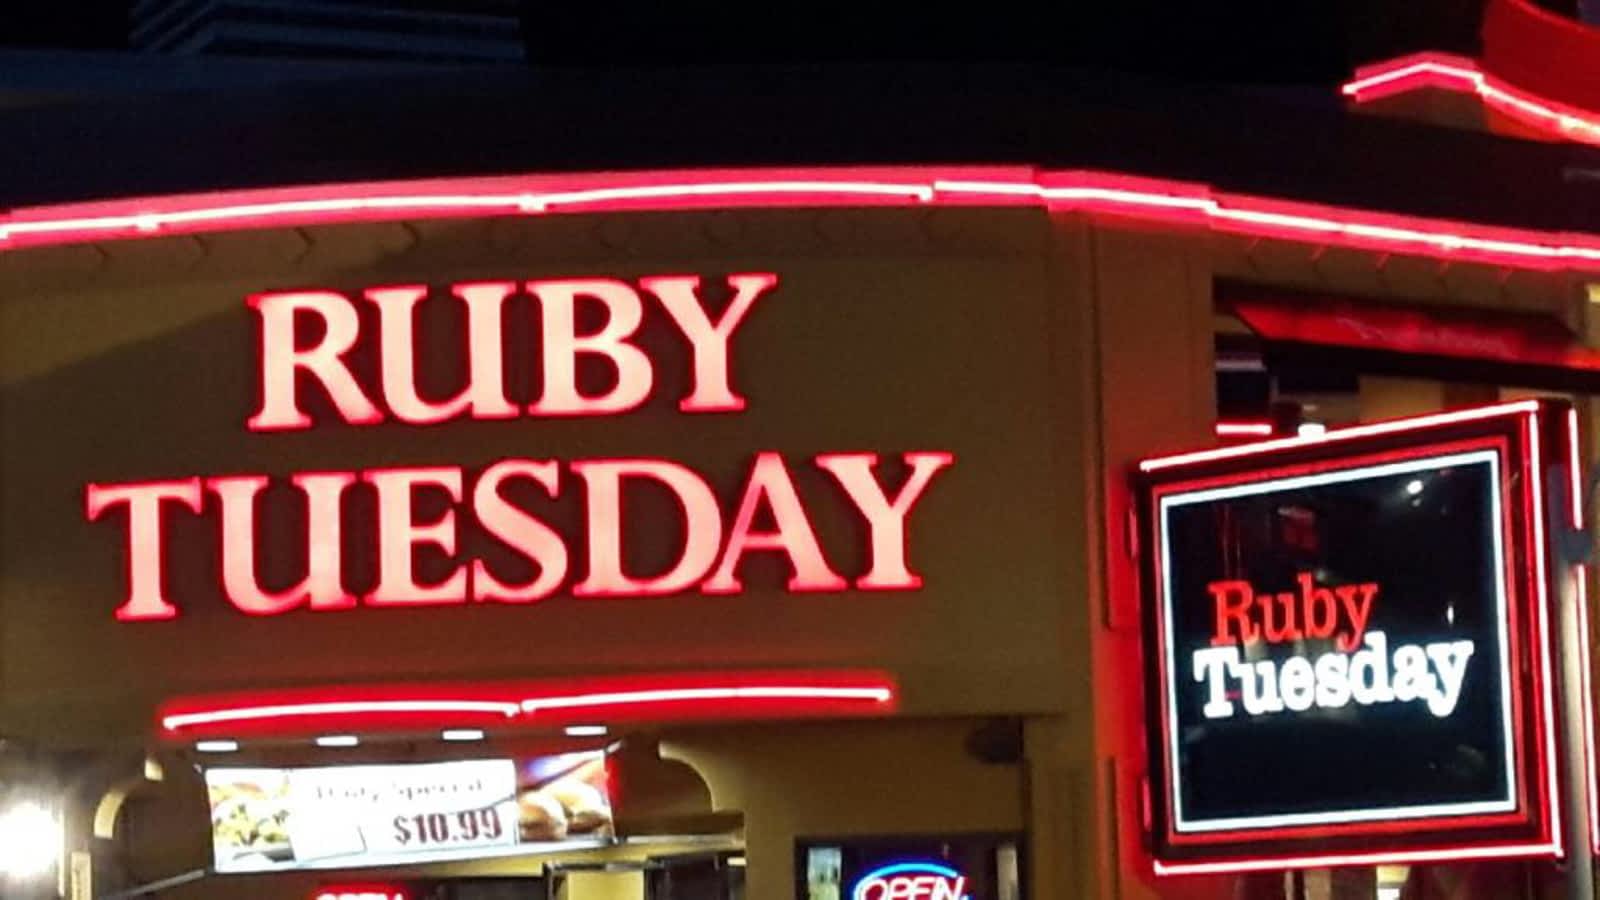 ruby tuesday calories counter